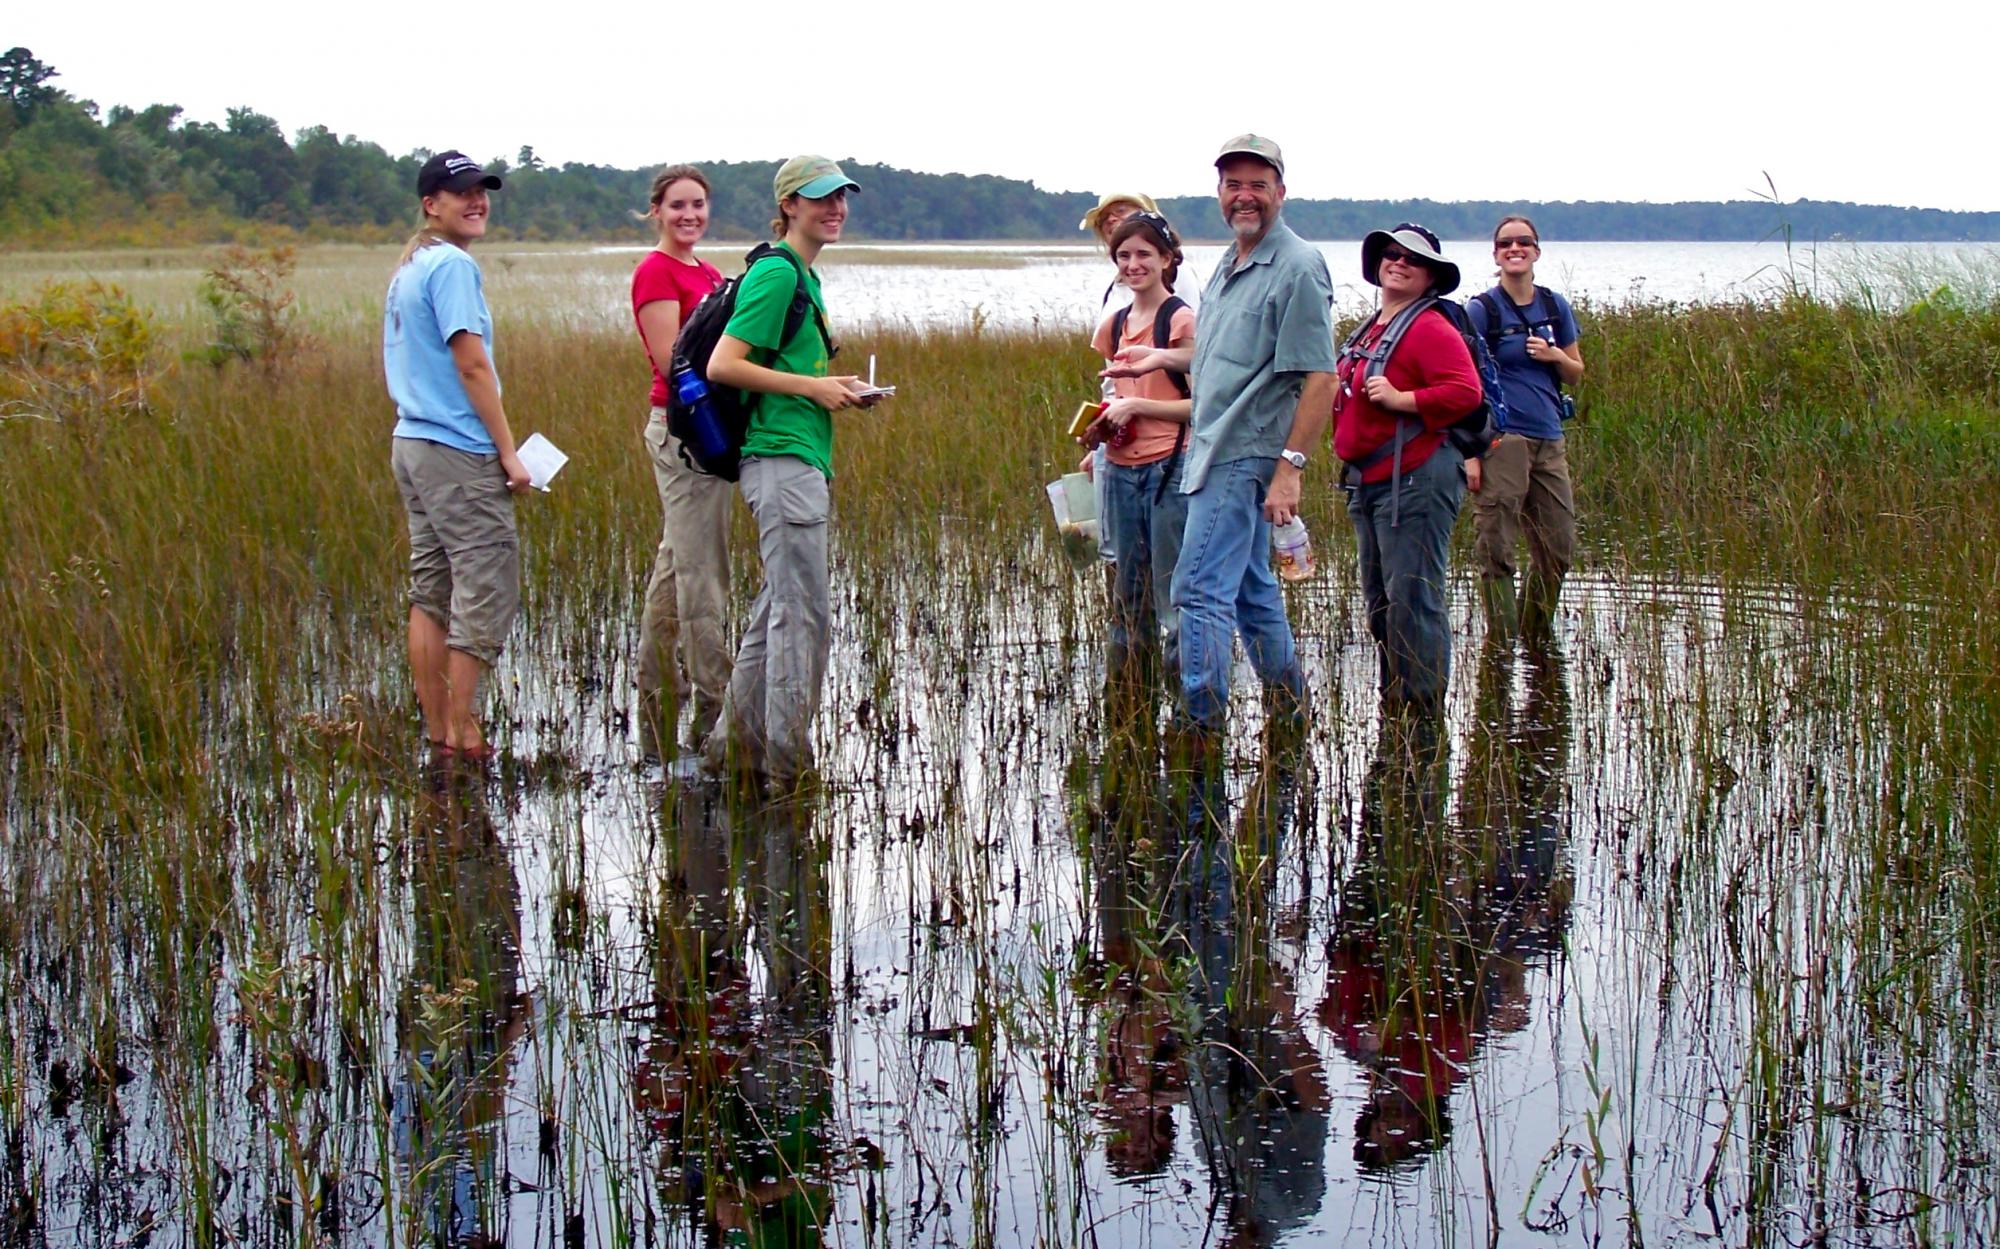 Alan Weakley leads graduate students at the University of North Carolina on excursion along the shores of Lake Waccamaw.